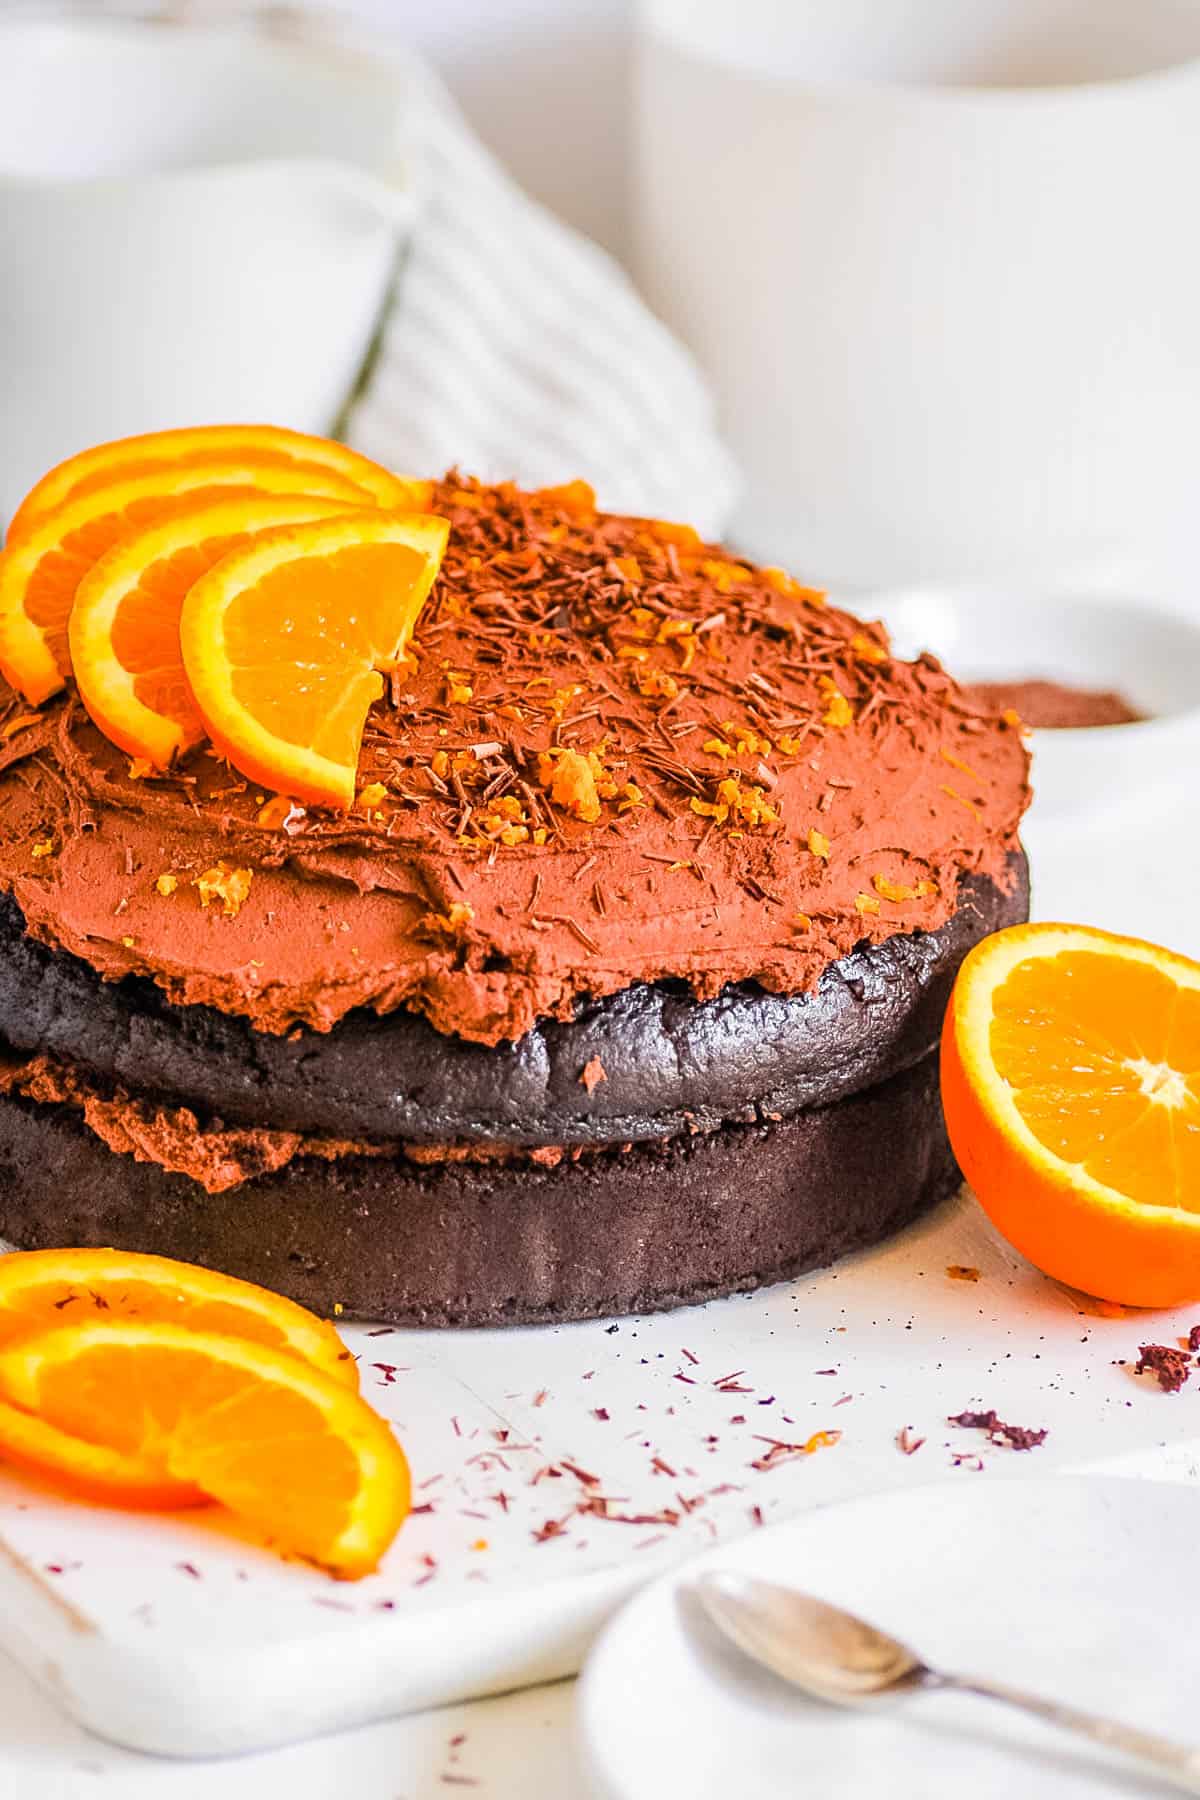 Chocolate orange cake topped with orange slices and a chocolate ganache frosting on a white cake board.